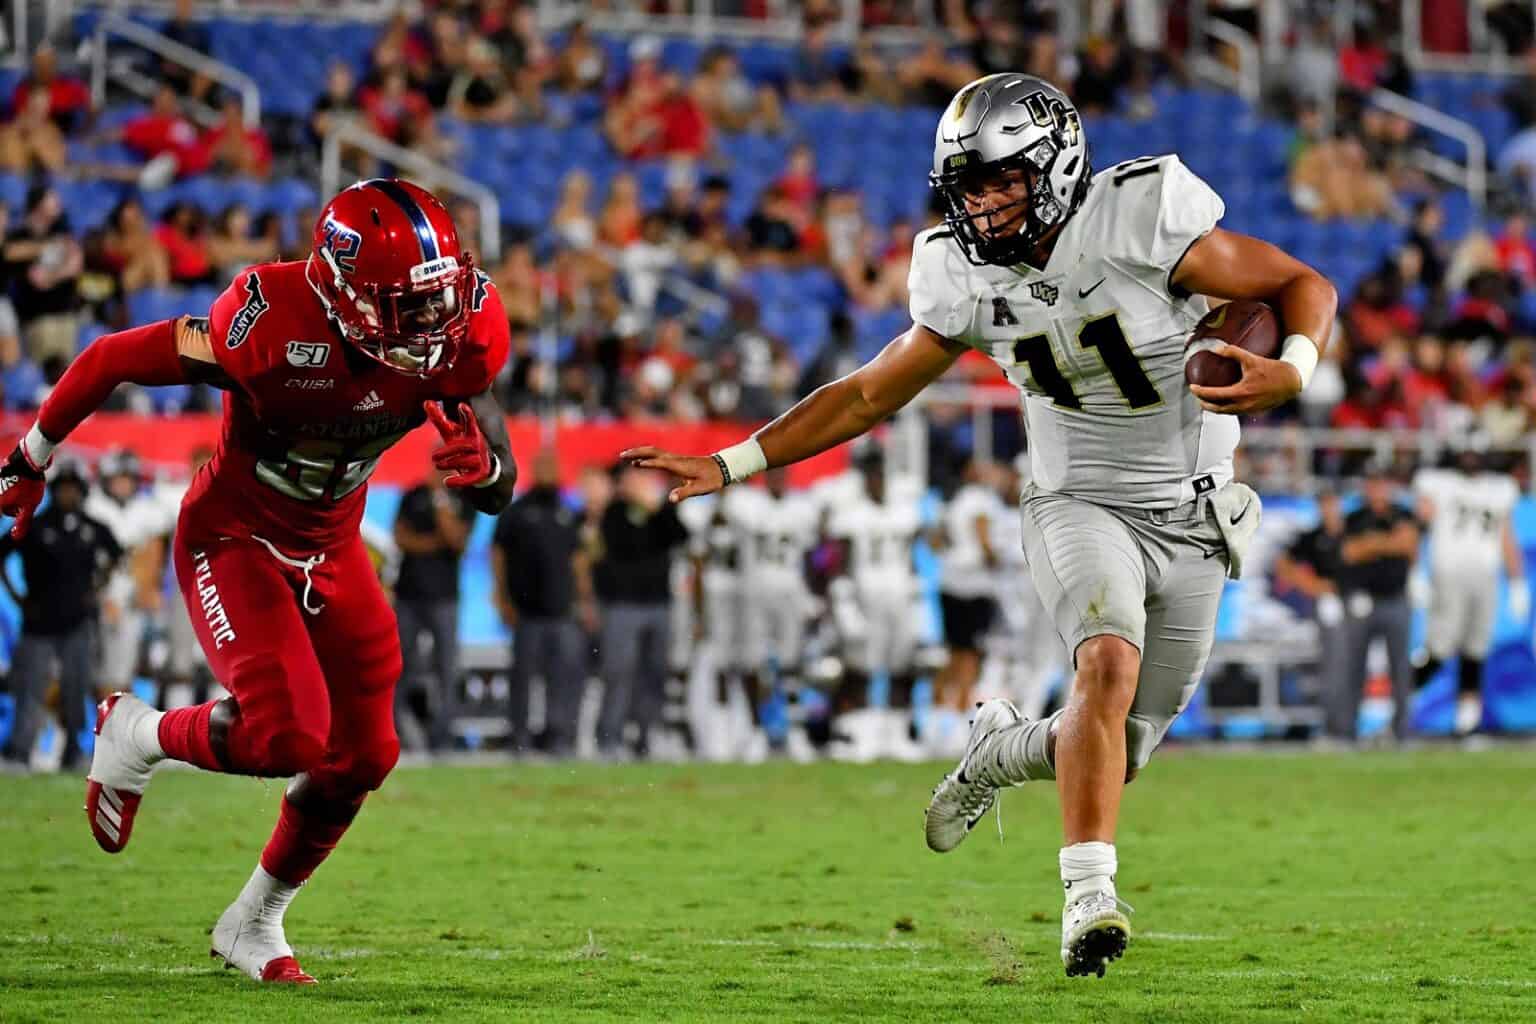 UCF, FAU schedule home-and-home football series for 2022, 2025